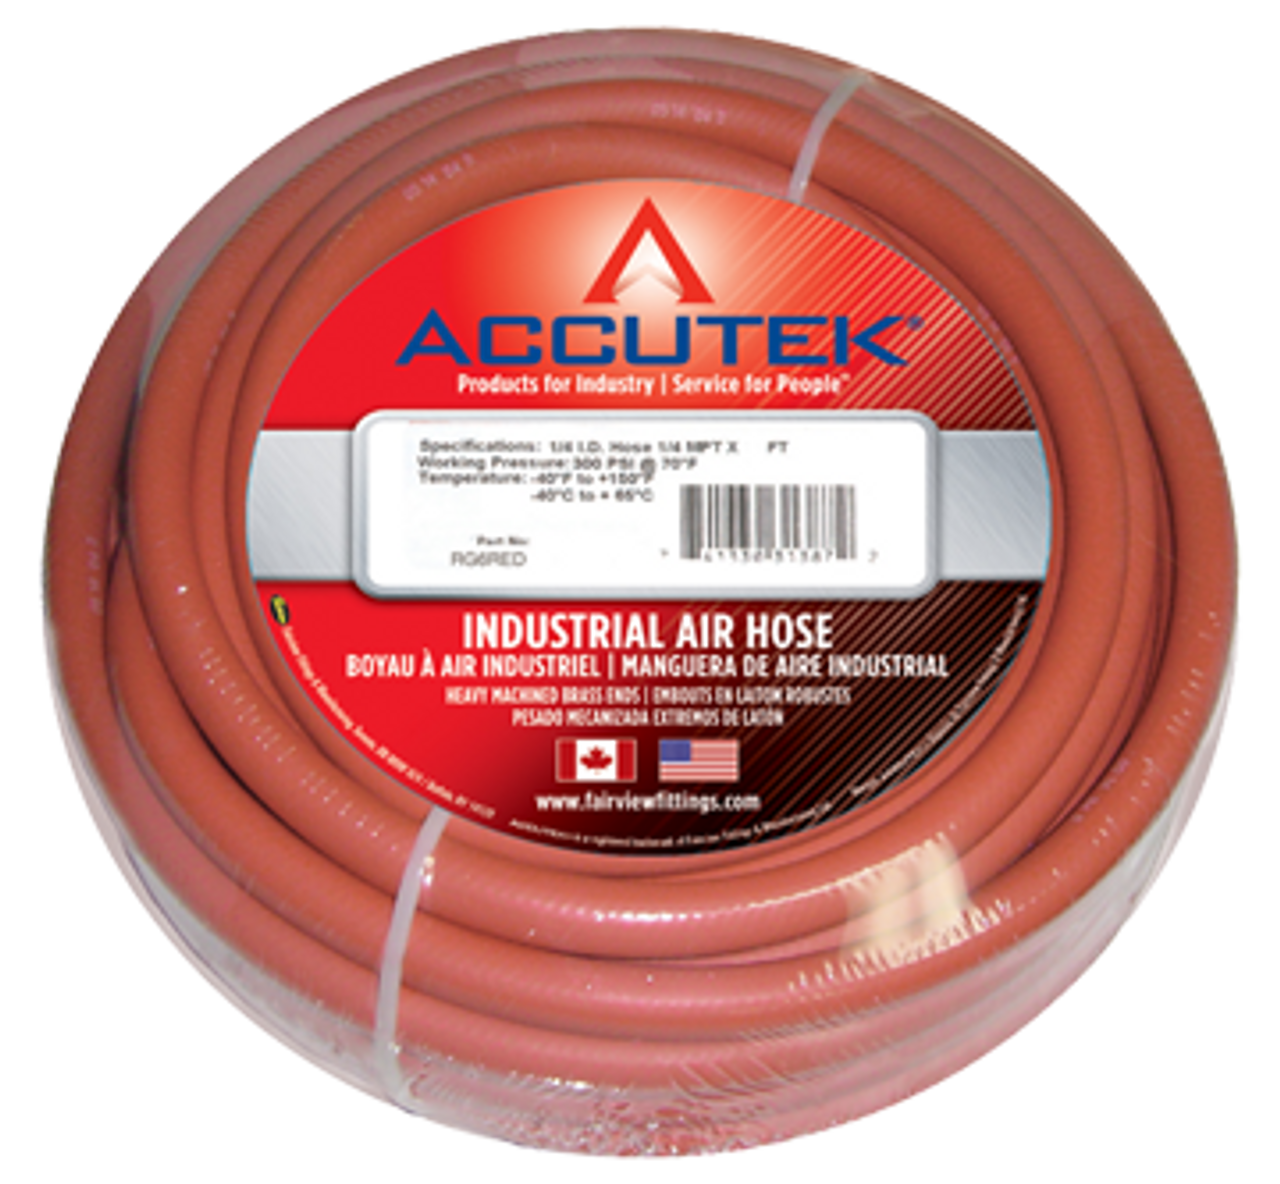 1/2 x 1/2" x 25' Red EPDM 250 PSI Rubber Air Hose Assembly - Brass Male NPT Ends  RG8/2RED-25D